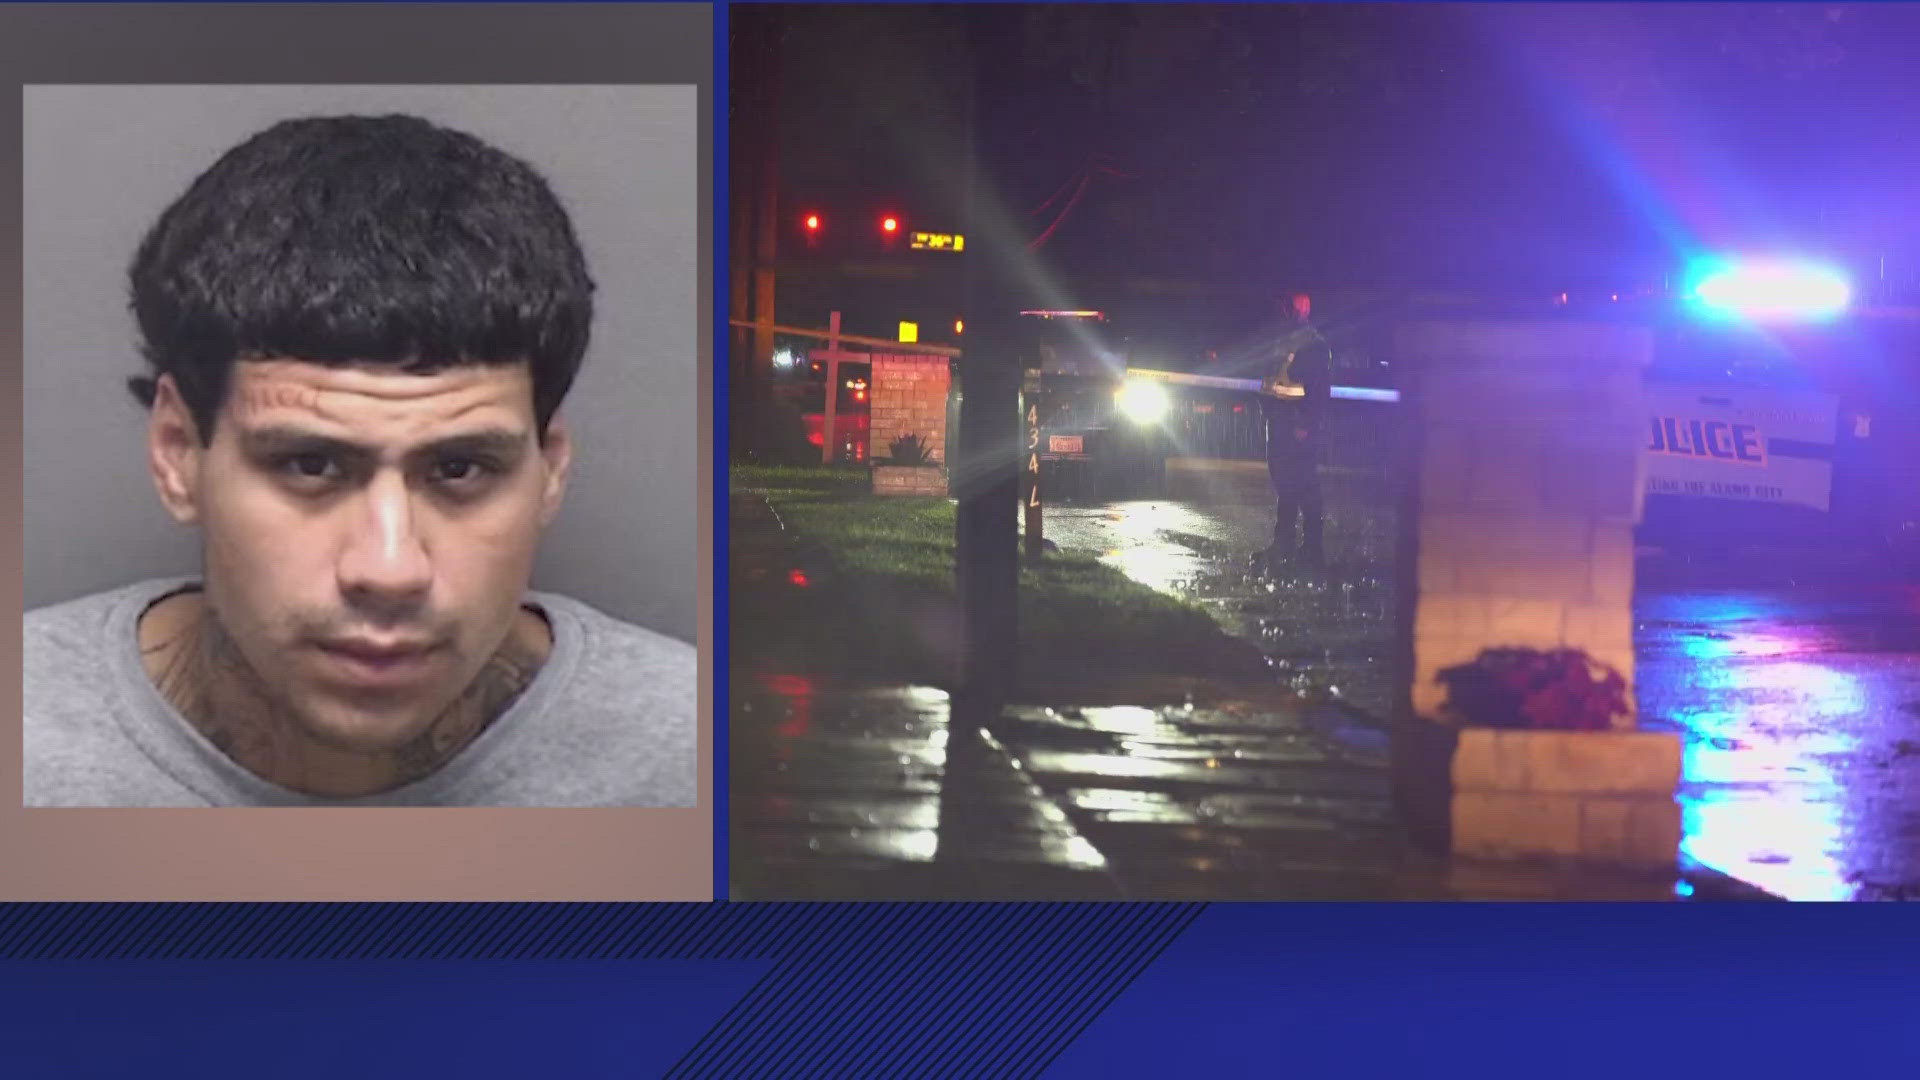 23-year-old Matthew Ortiz confessed to killing the man claiming he shot him in self-defense. Ortiz accepted a plea deal and will serve 30 years behind bars.